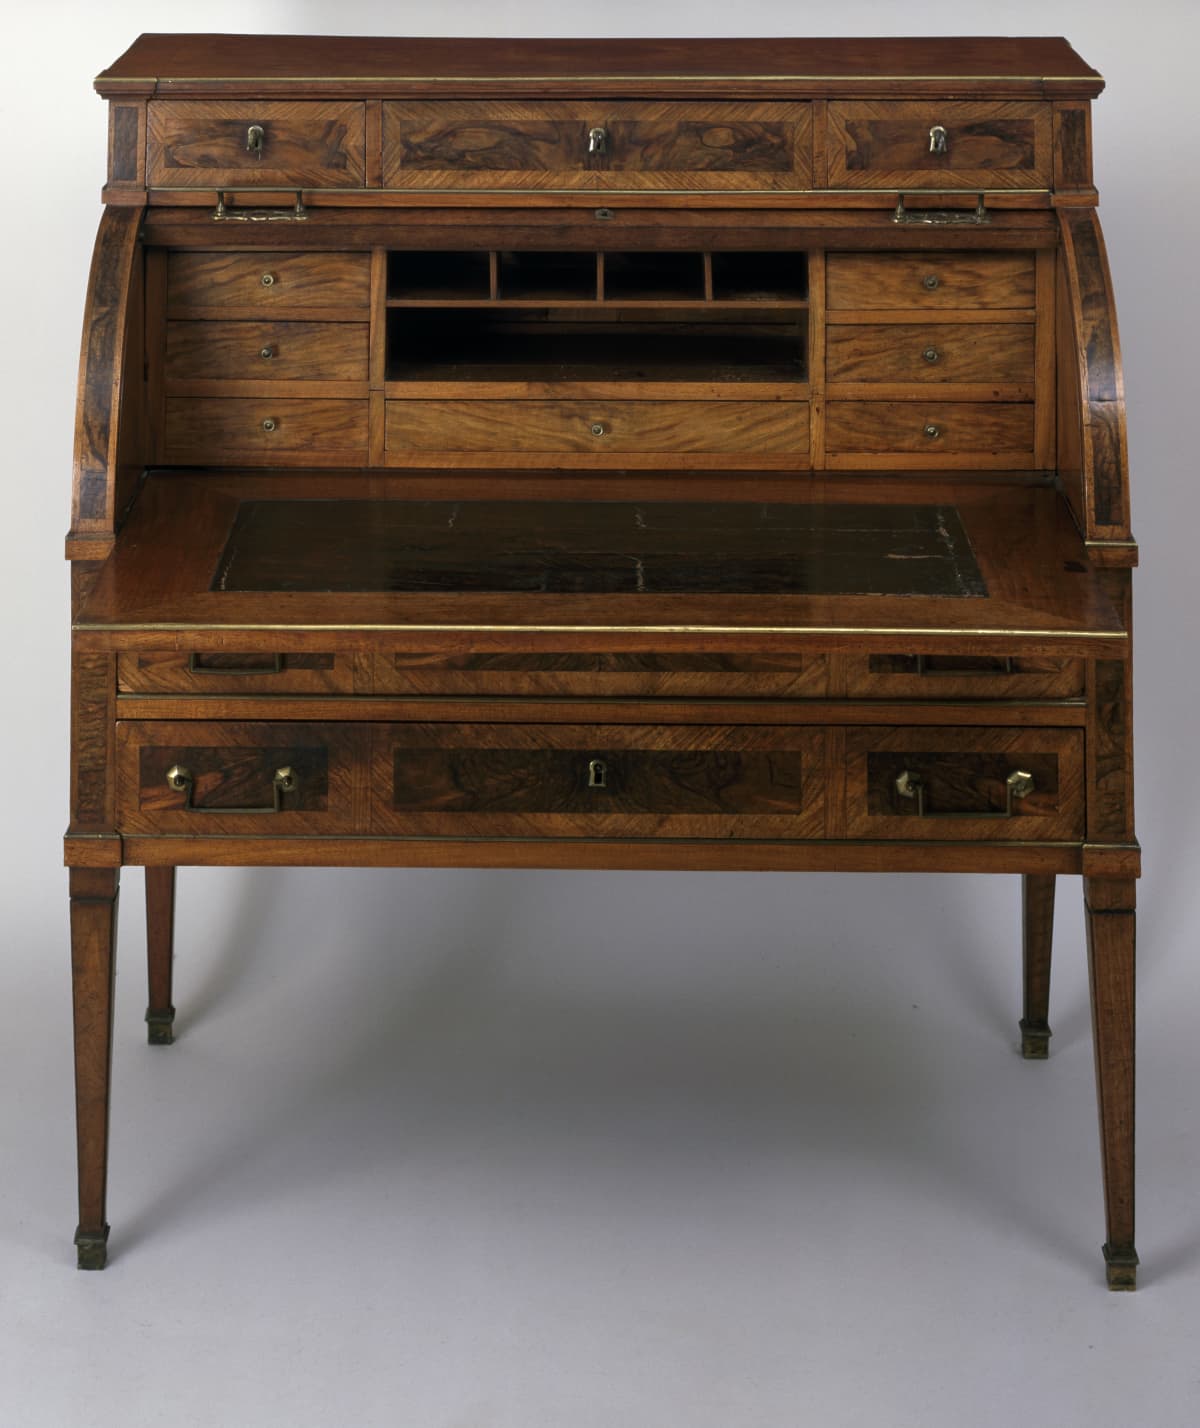 FRANCE - DECEMBER 02:  Louis XVI style spruce roll-top writing desk with walnut veneer finish, open. France, 18th century. (Photo by DeAgostini/Getty Images)